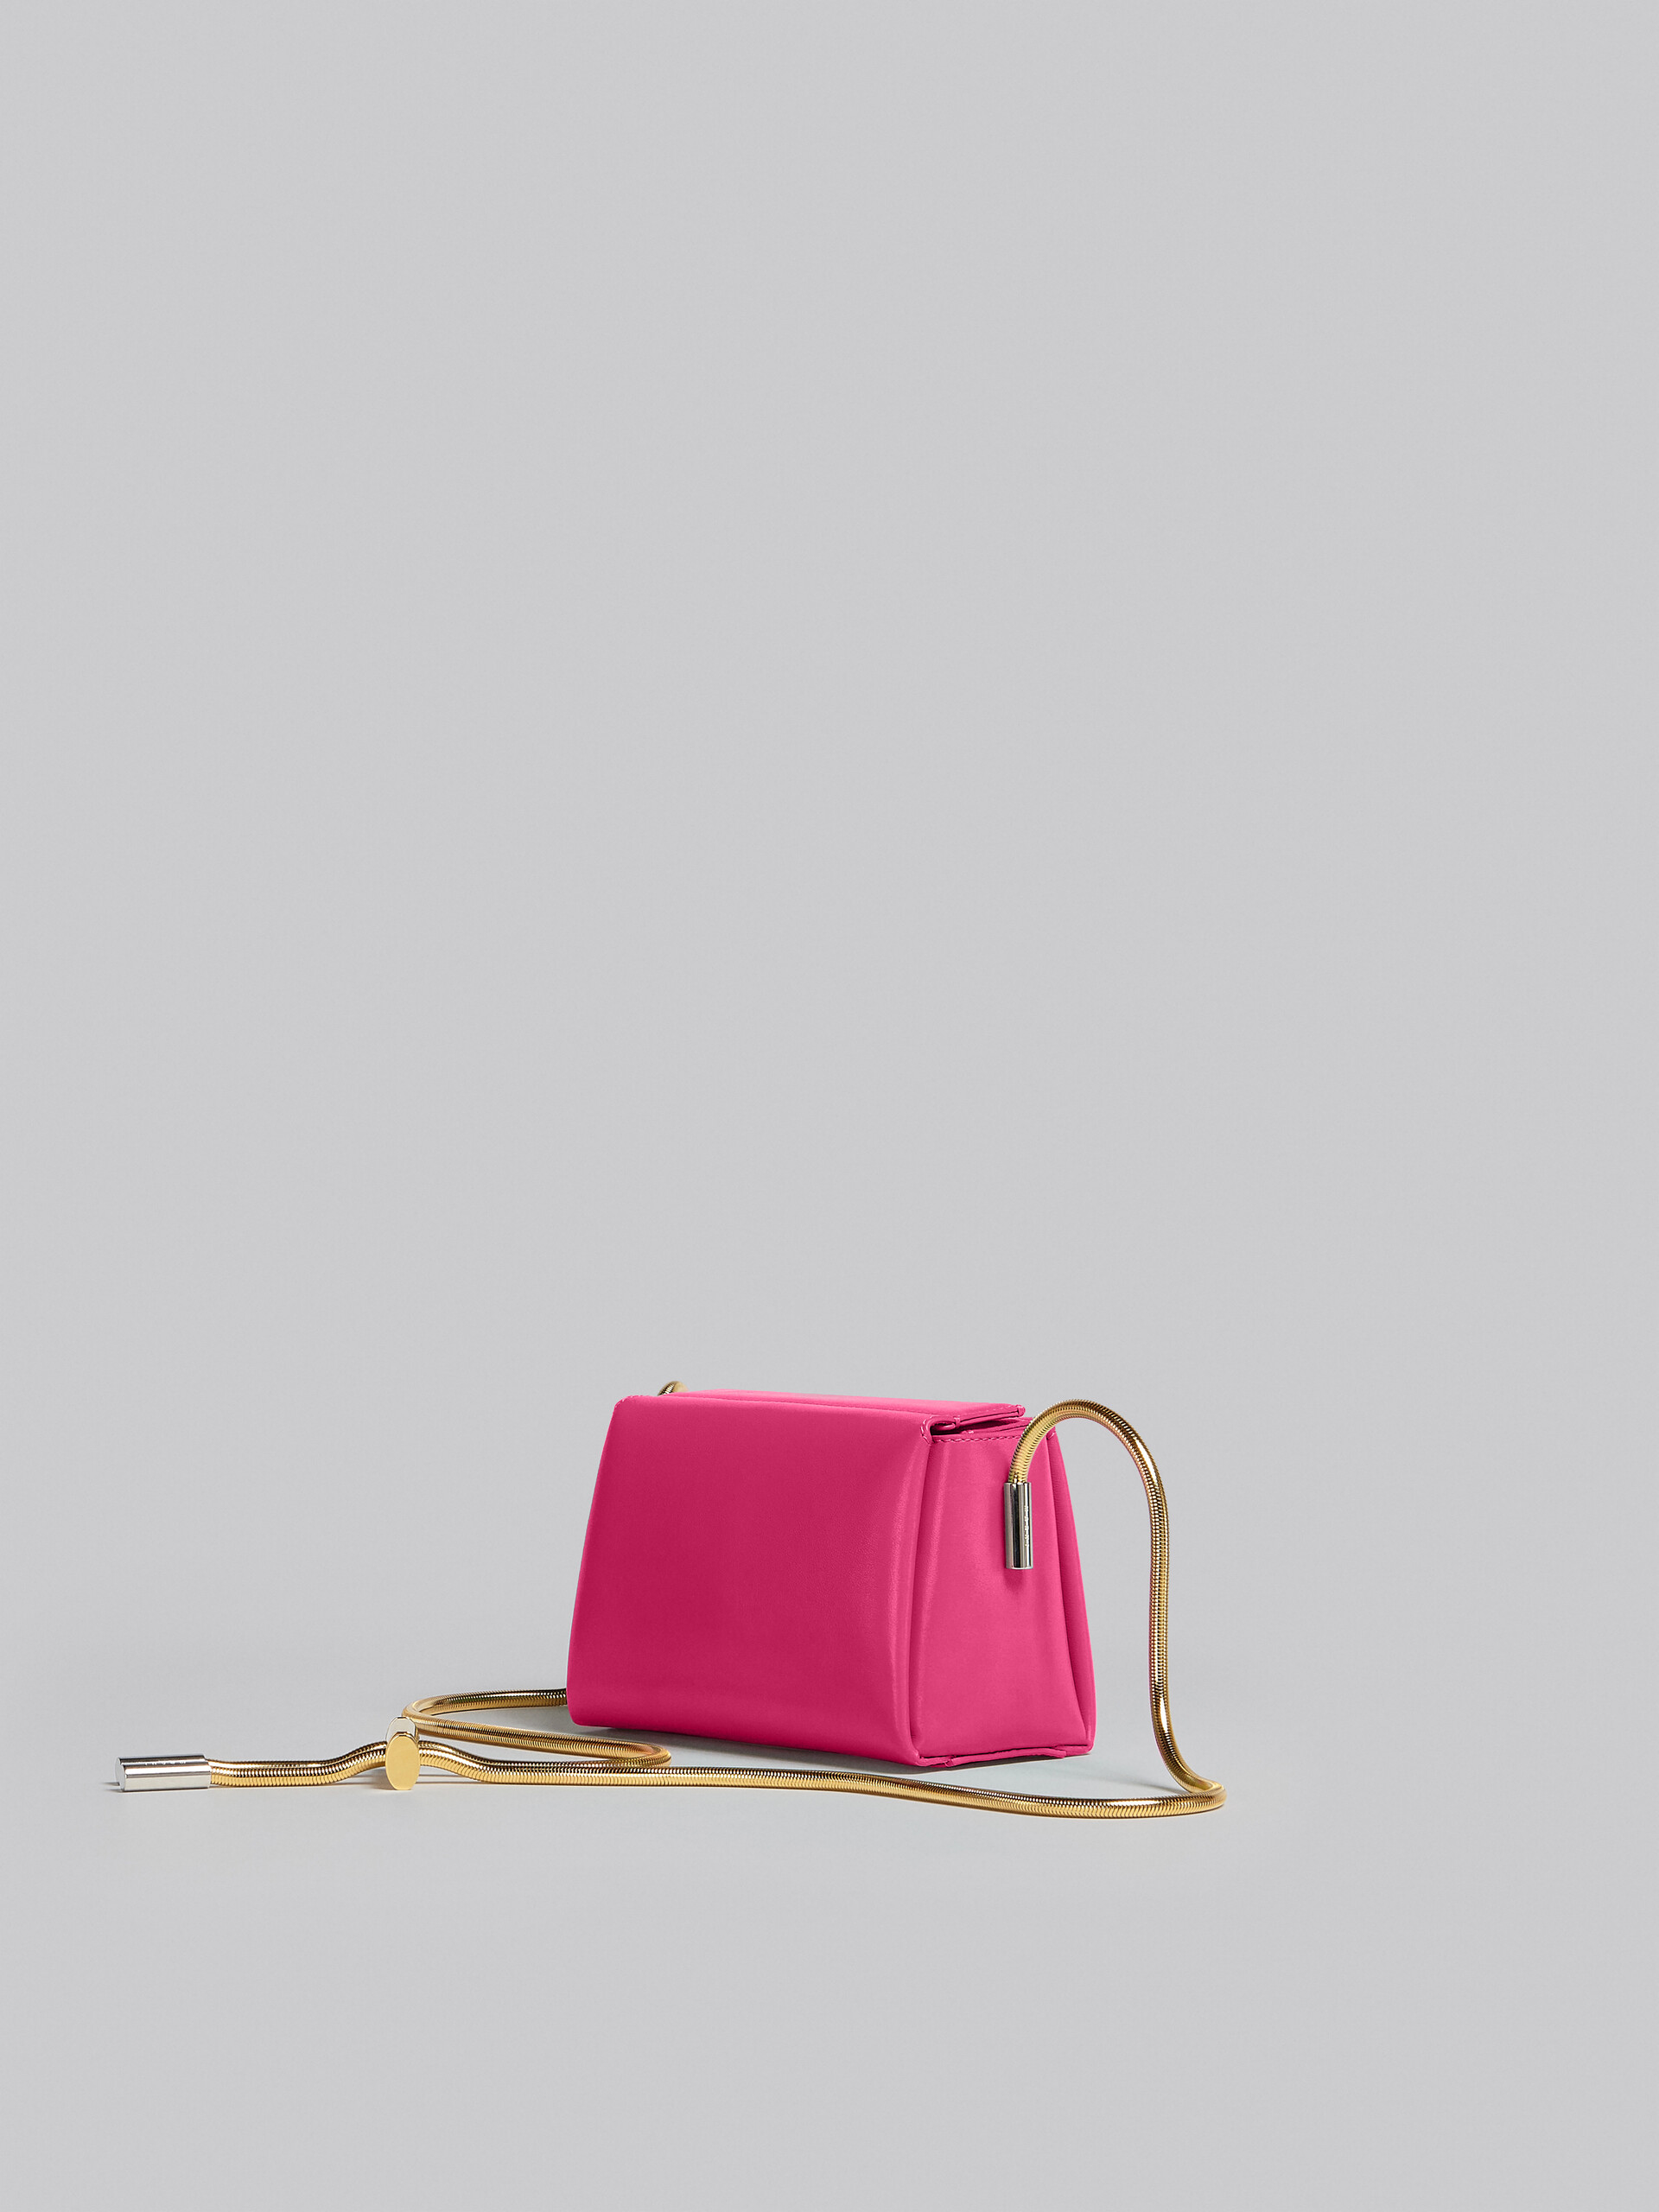 Toggle Small Bag in fuchsia leather - Shoulder Bag - Image 2